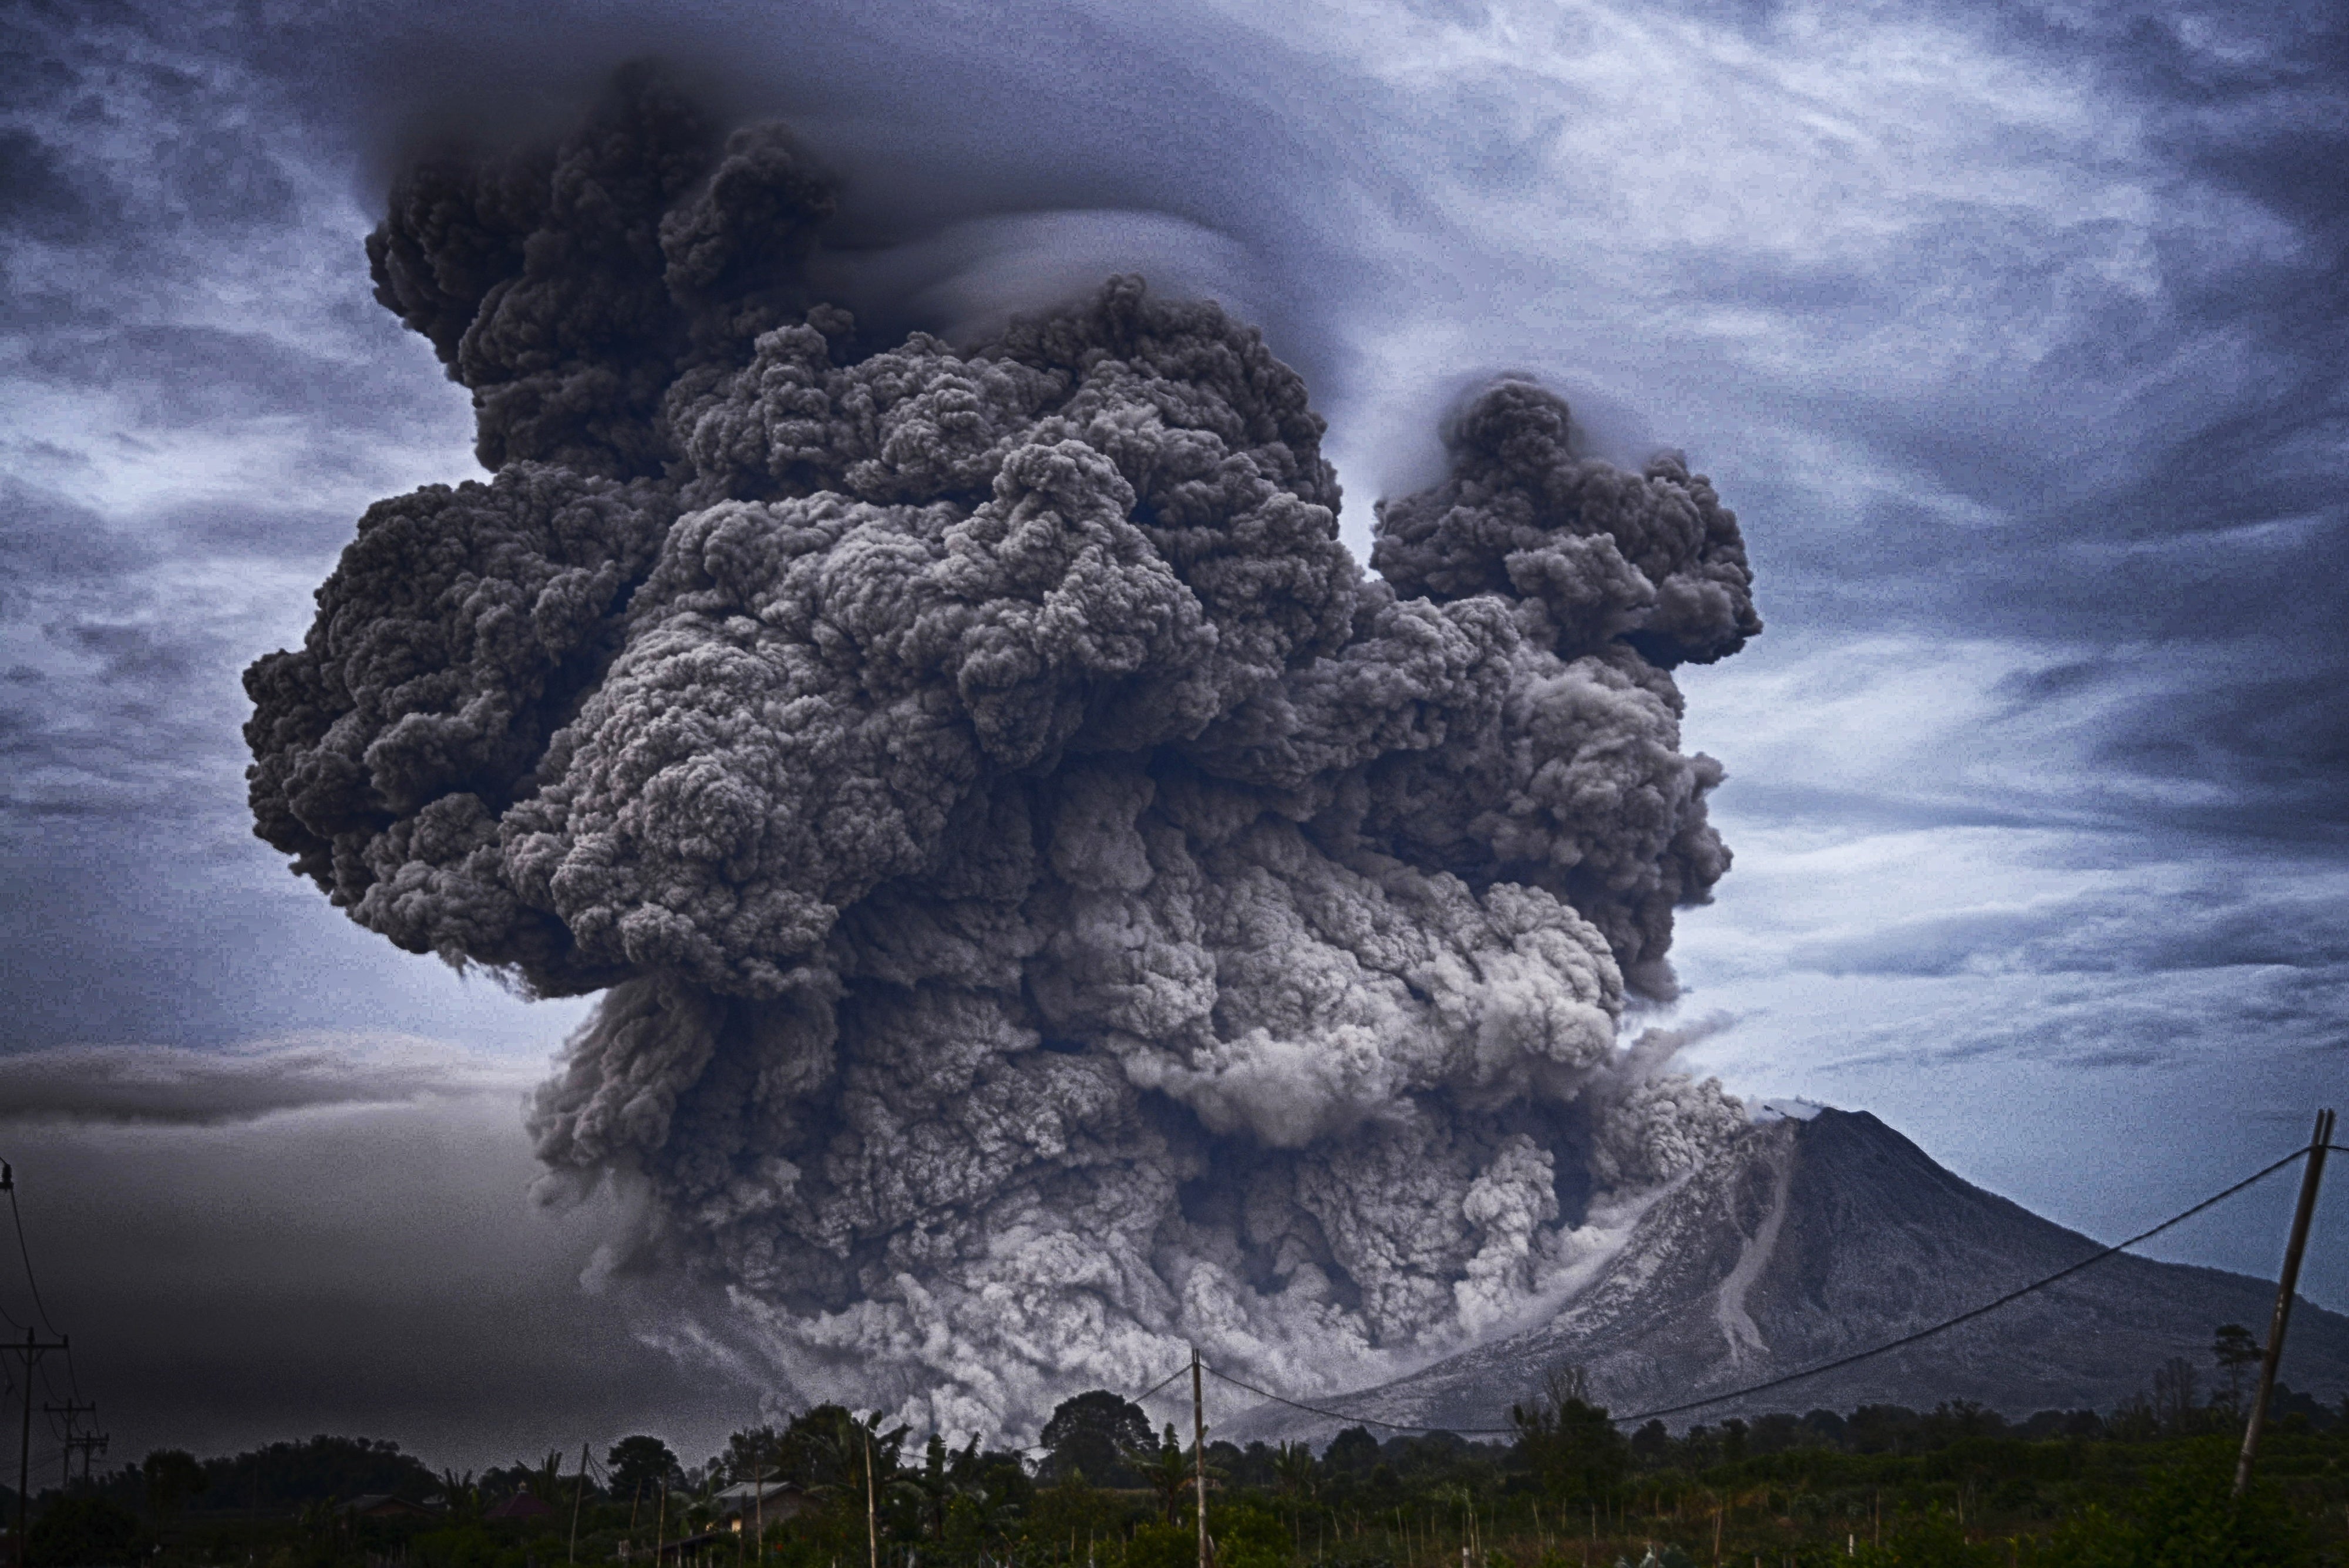 Get Ready for More Volcanic Eruptions as the Planet Warms - Scientific American